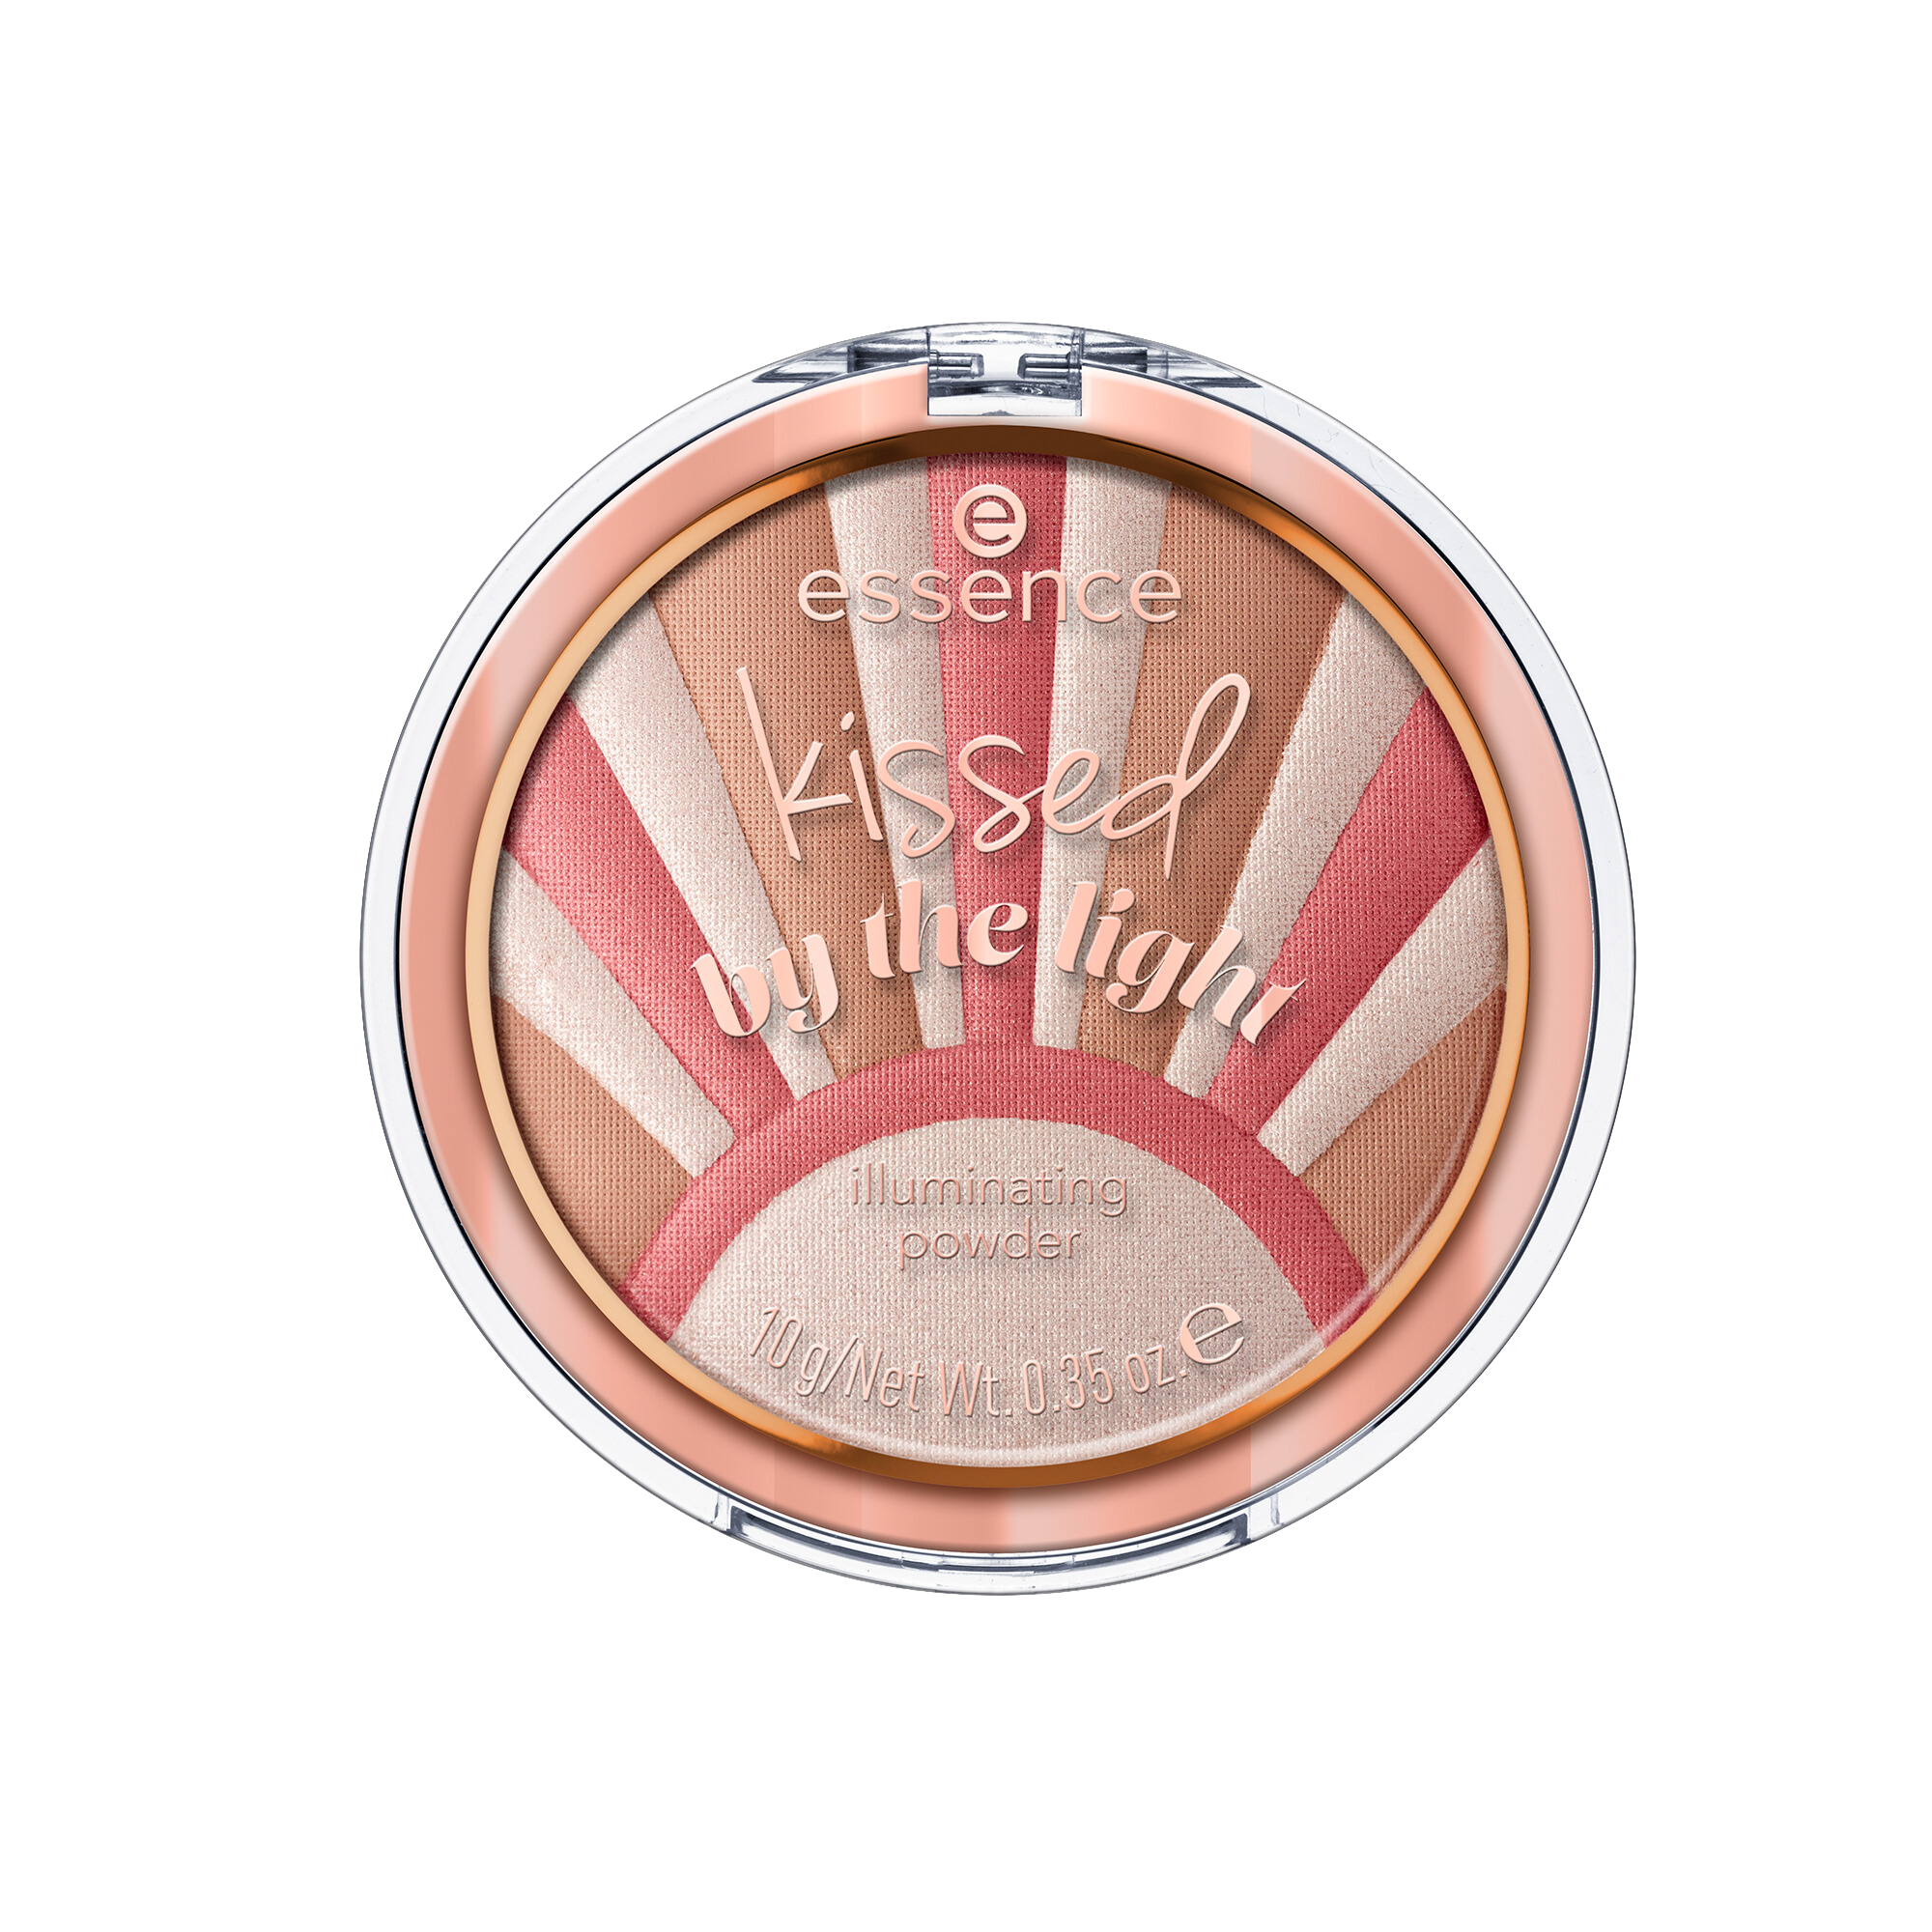 Kissed By The Illuminator – makeup essence Light Face